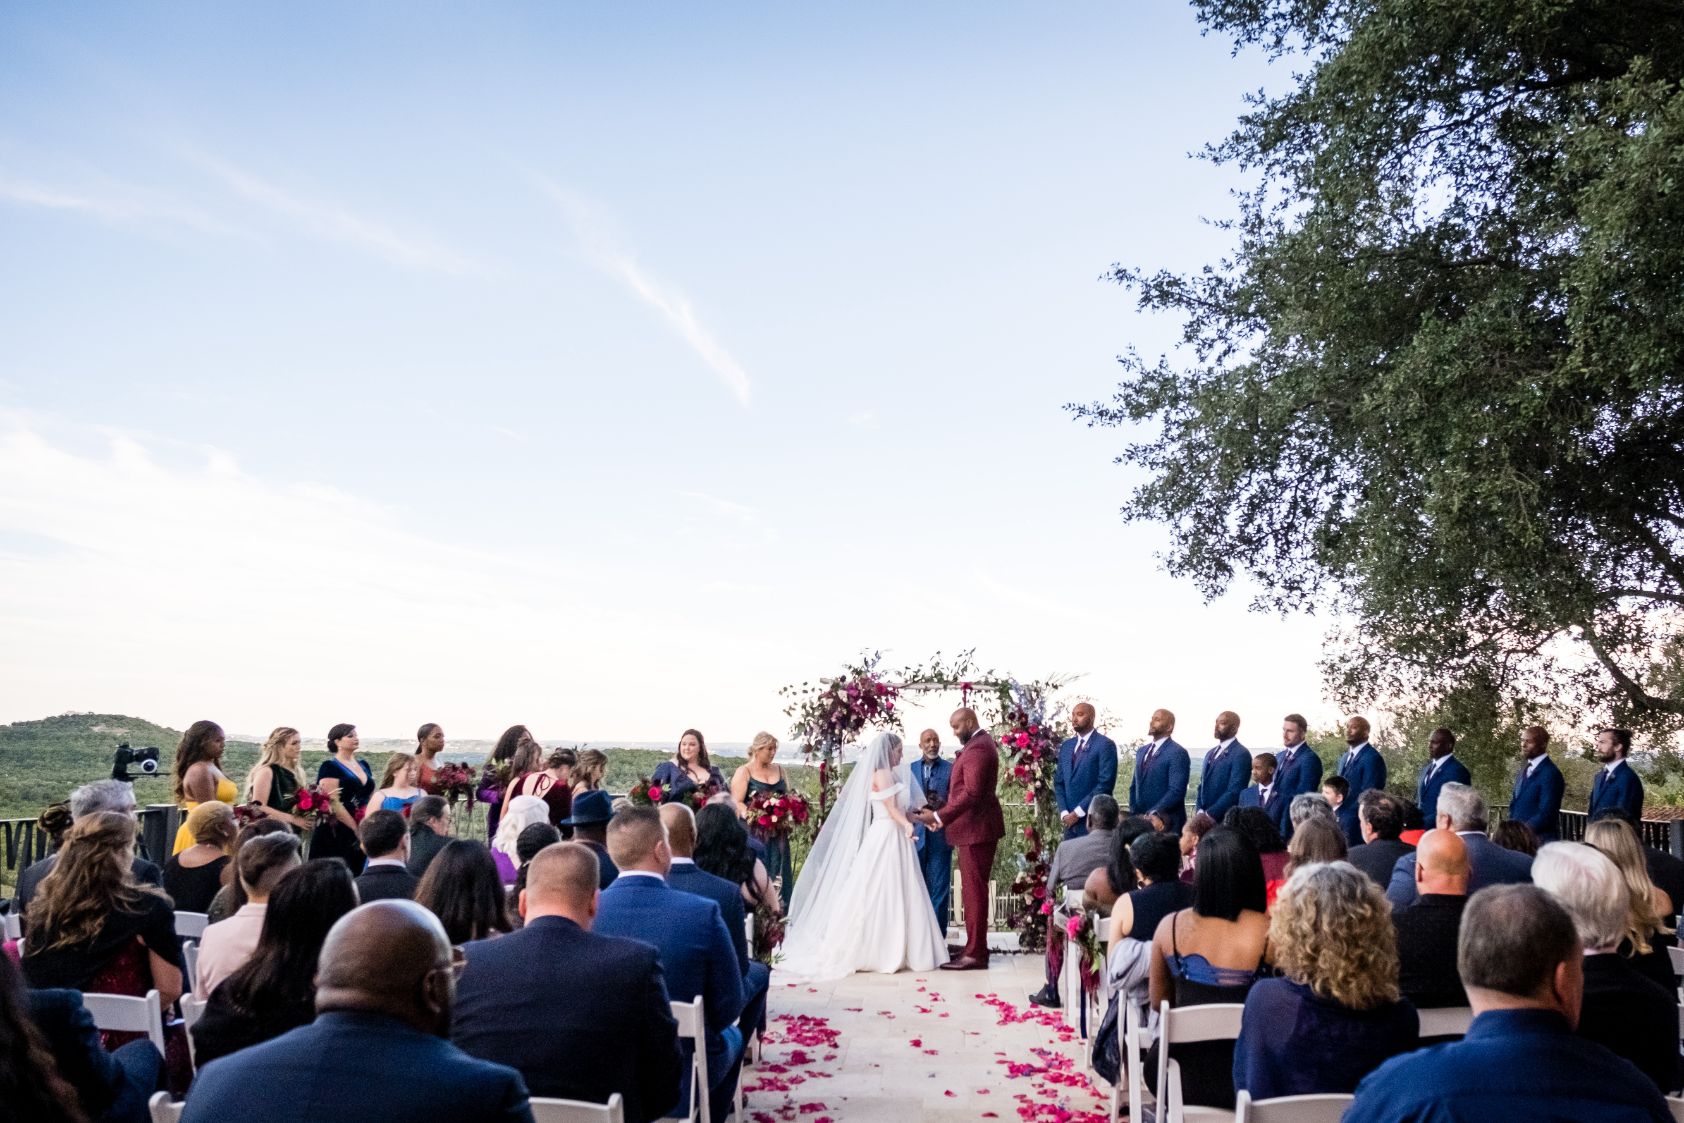 Bride and room hold hands at floral arch altar. Red floral petals are scattered on the ground. The bridal party is lined up on each side of the couple, and the wedding guests are sitting in rows of white chairs. Clear blue skies and green rolling hills are in the background.